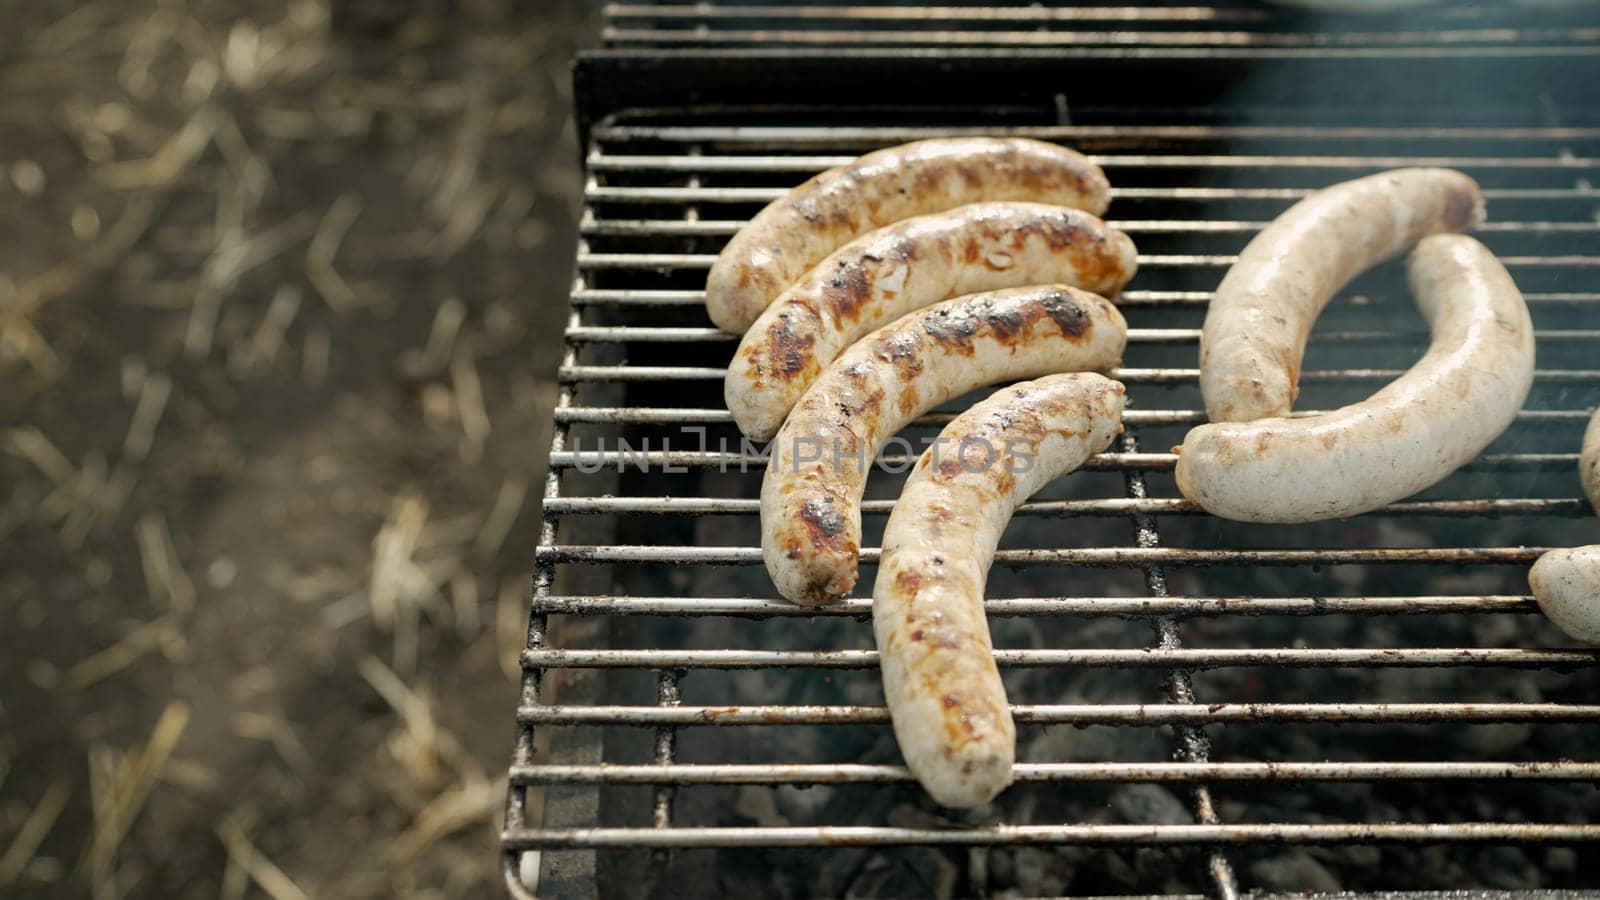 Bratwurst or Hot Dogs on Grill with Flames. Sausages are fried on a barbecue grill. by Rusrussid